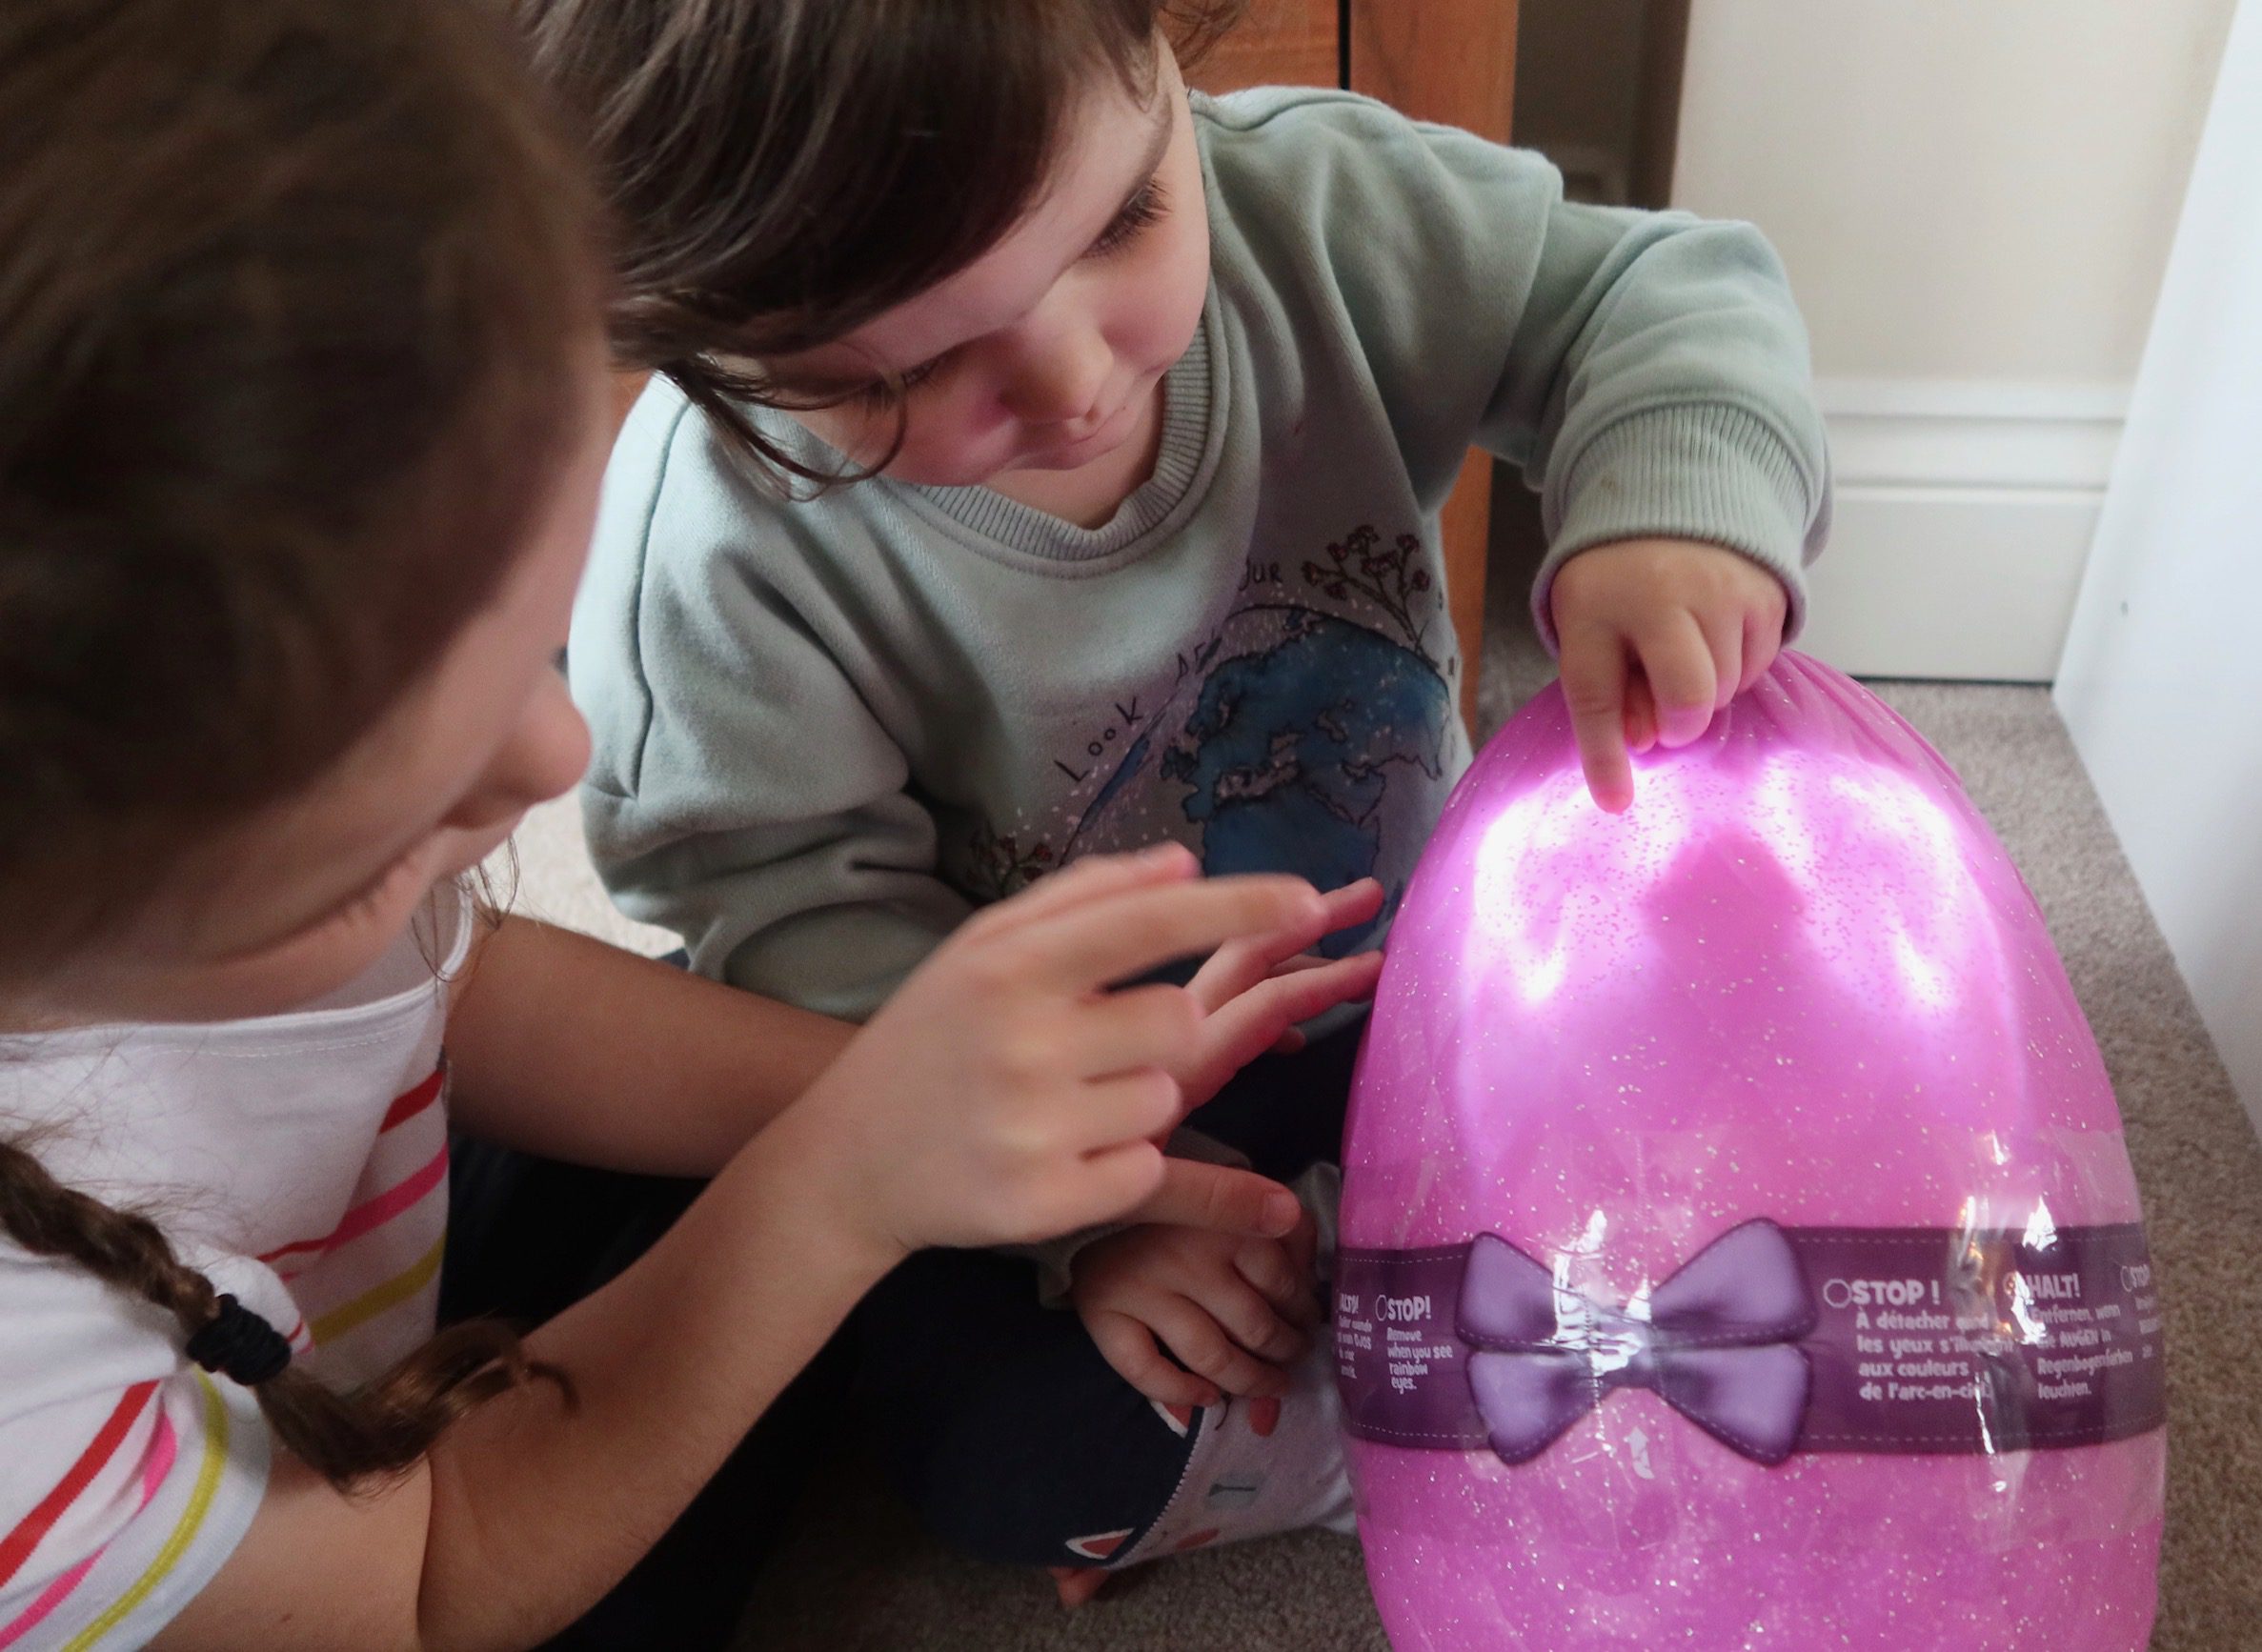 REVIEW - Hatchimals WOW - the Hatchimal you can rehatch! - Real Mum Reviews